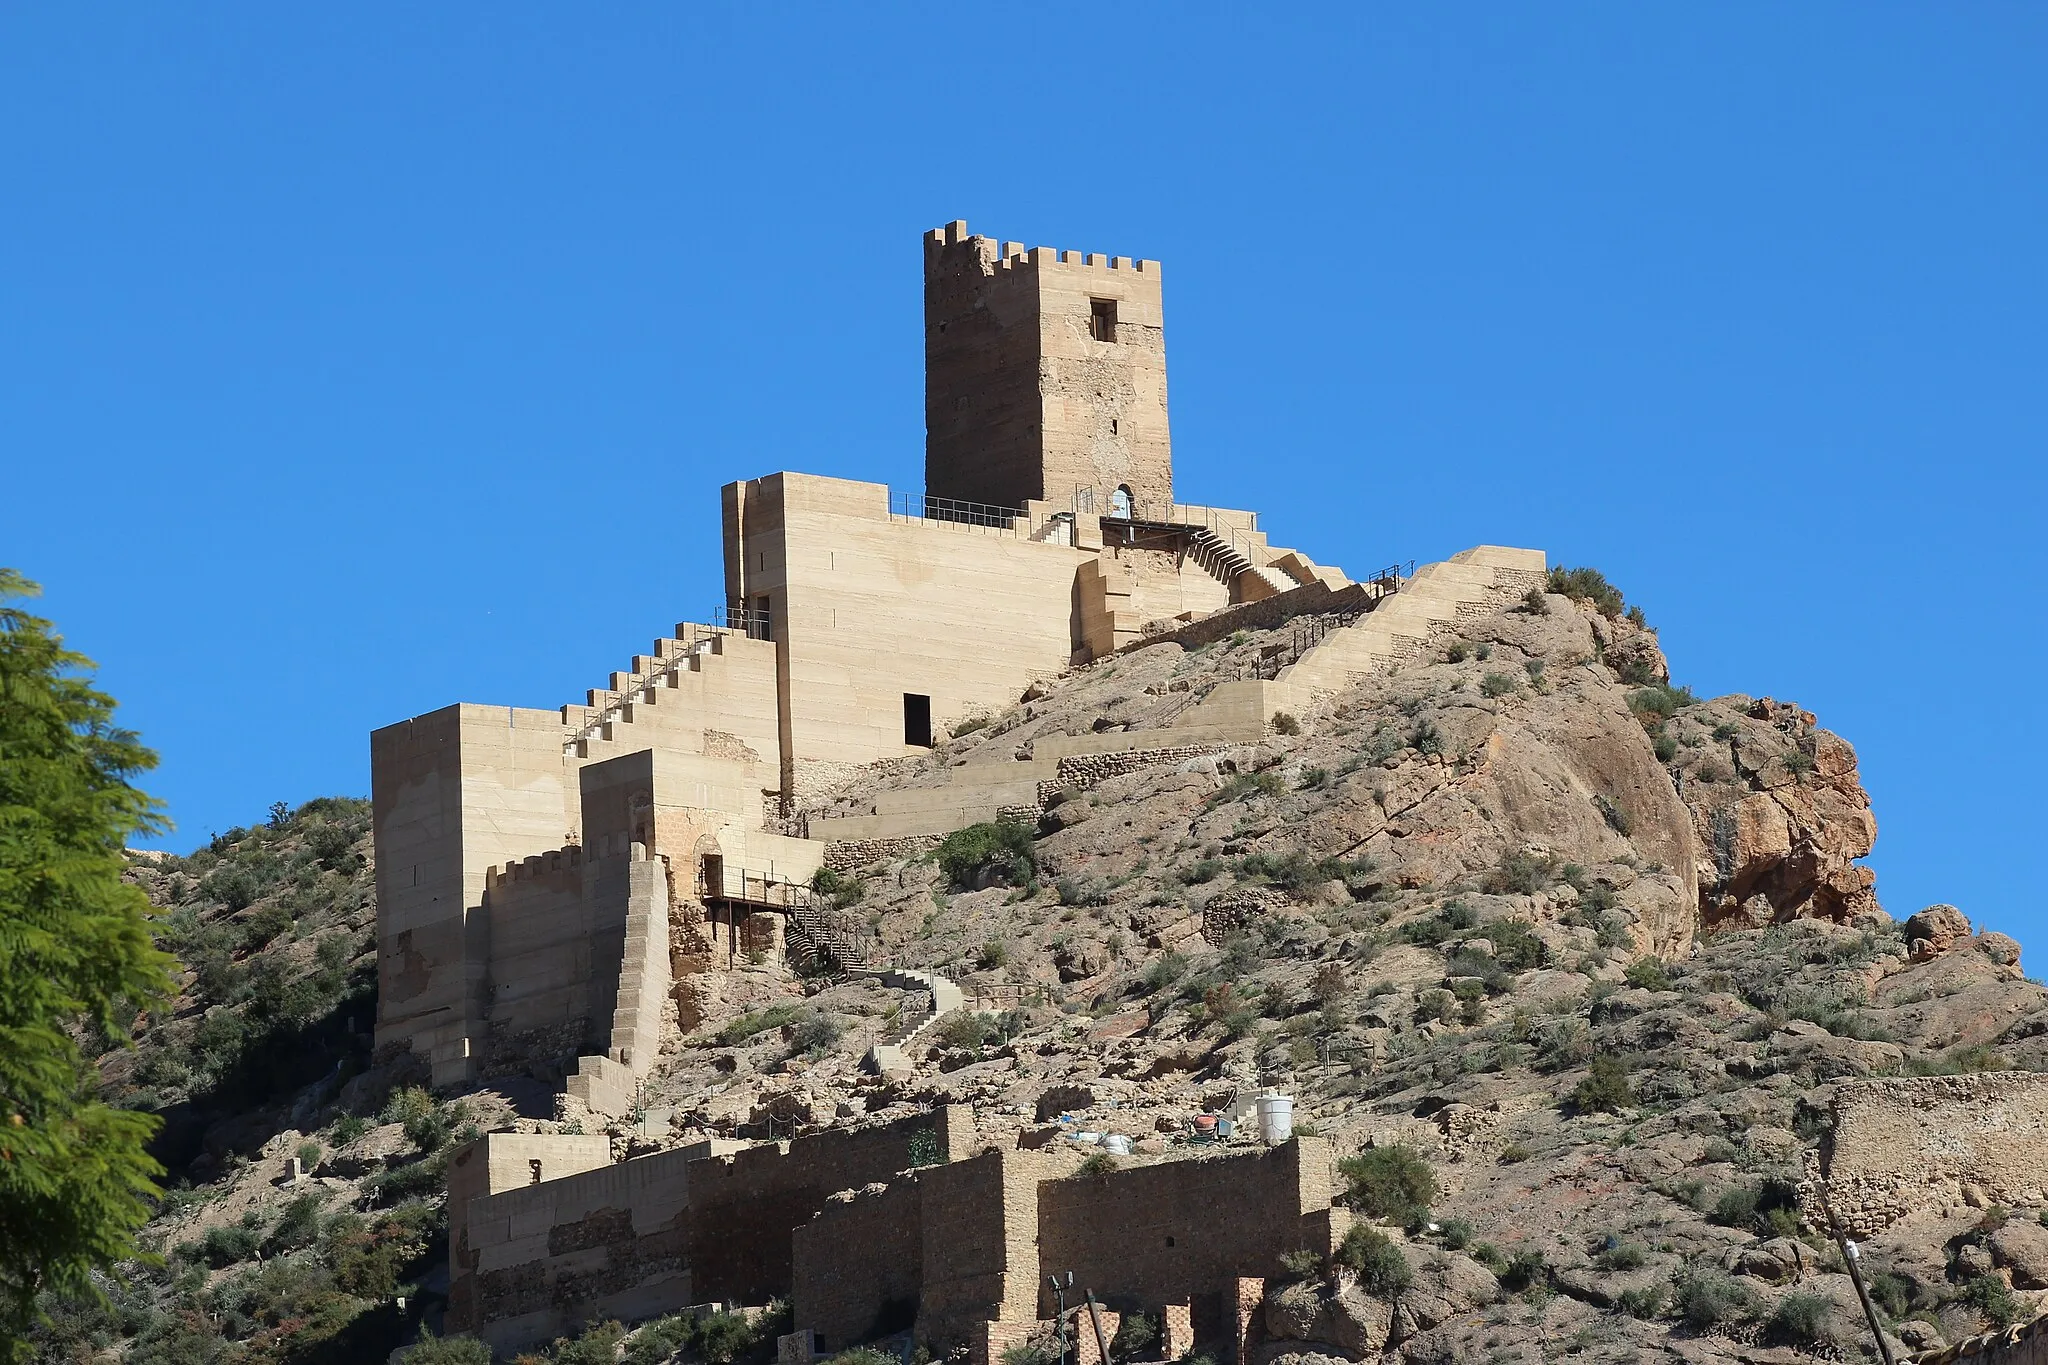 Photo showing: Castillo de Alhama from Plaza America, Alhama de Murcia. Originally built in the 11th and 12th of Moorish origin and passed into Christian hands with the conquest of Granada in 1491. Therafter it was allowed to fall into ruin. It was declared a BIC  (Asset of Cultural Interest) in 1985 and is currently under restoration.